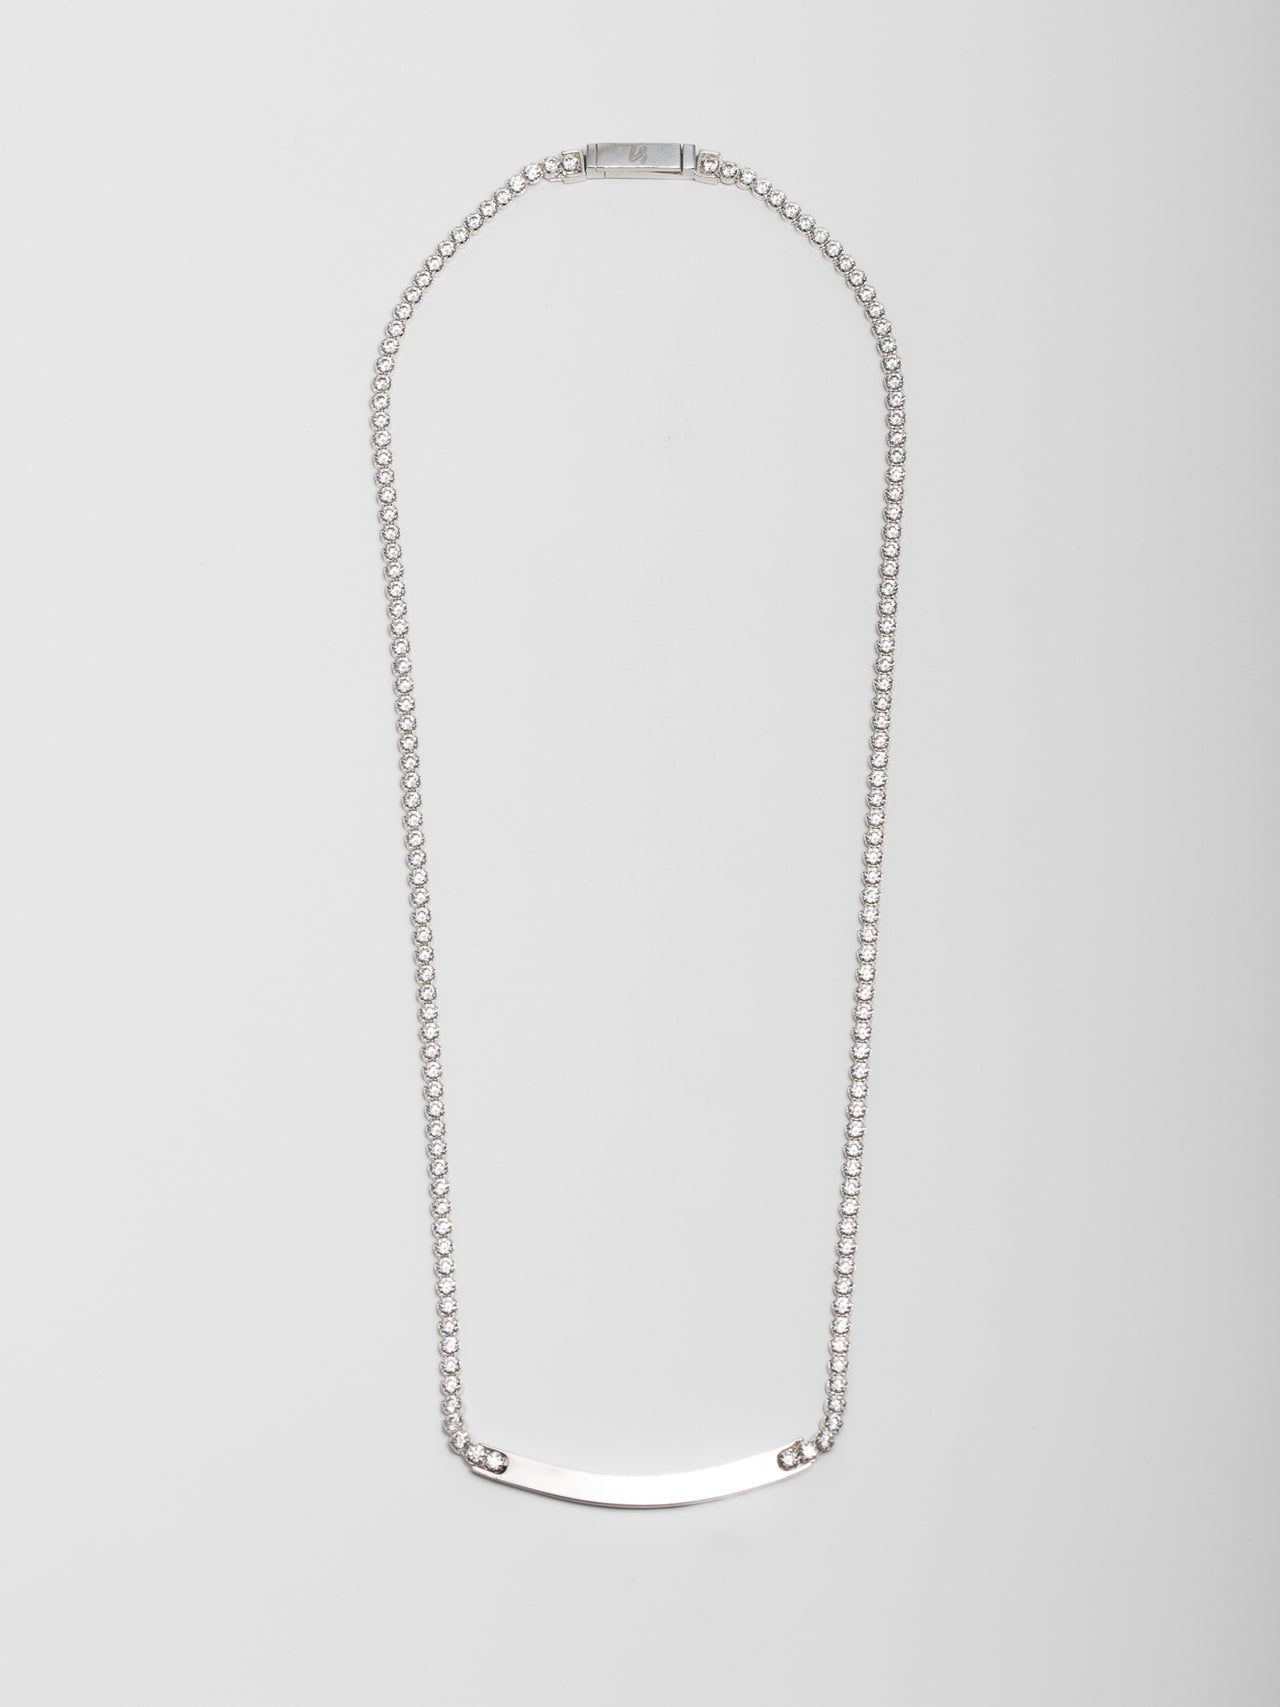 Sterling Silver Id Tennis Chain Necklace 2.7mm Round Cut Czech Crystal Necklace shot on light grey background.